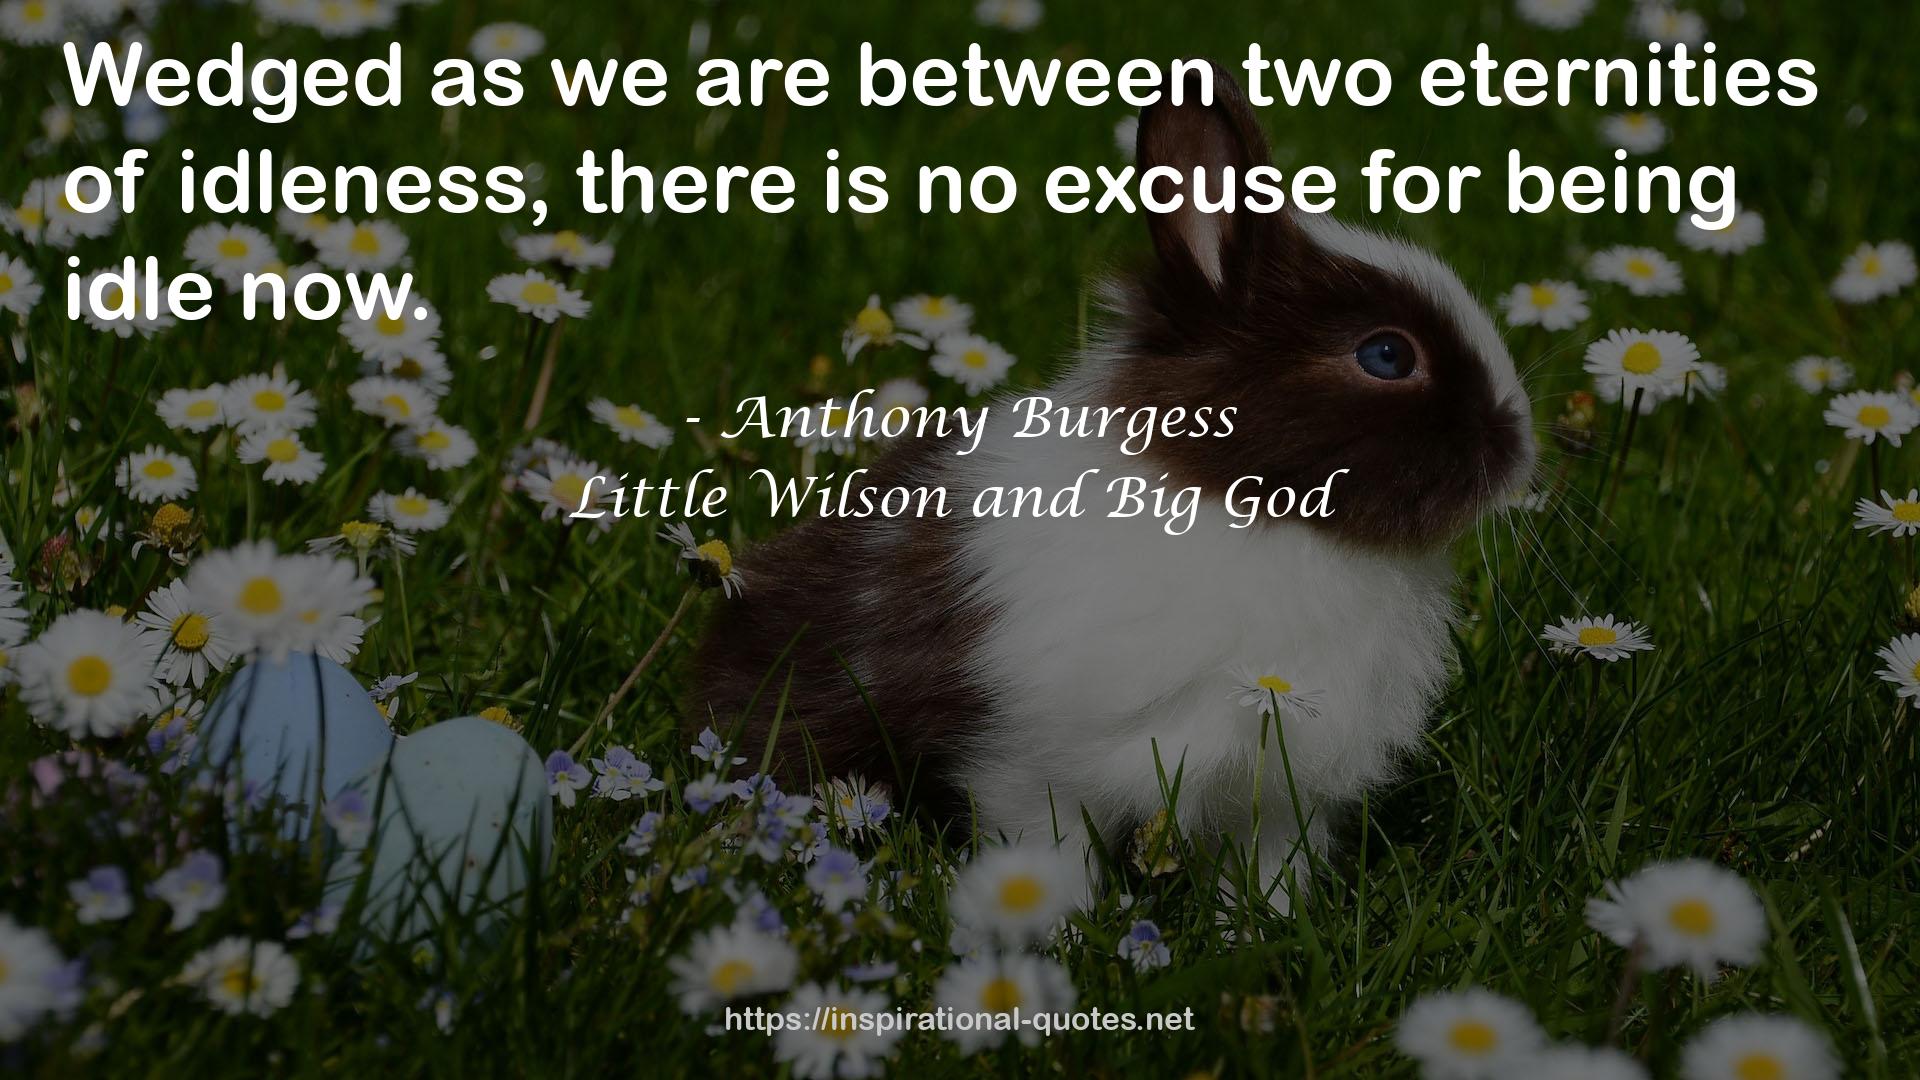 Little Wilson and Big God QUOTES